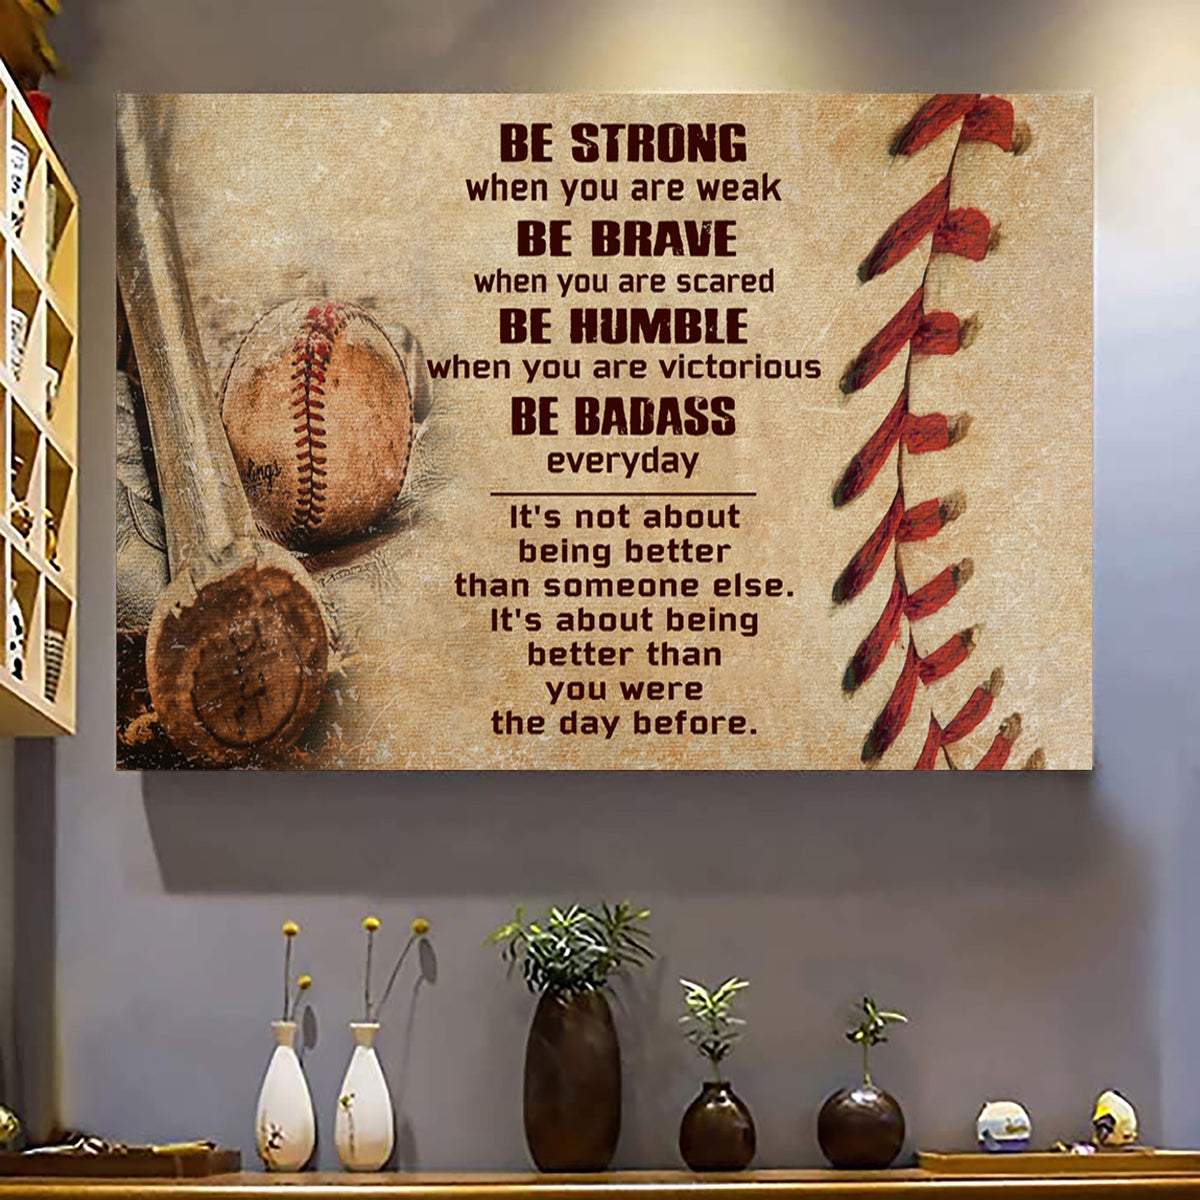 Rugby customizable poster canvas - It is not about better than someone else, It is about being better than you were the day before